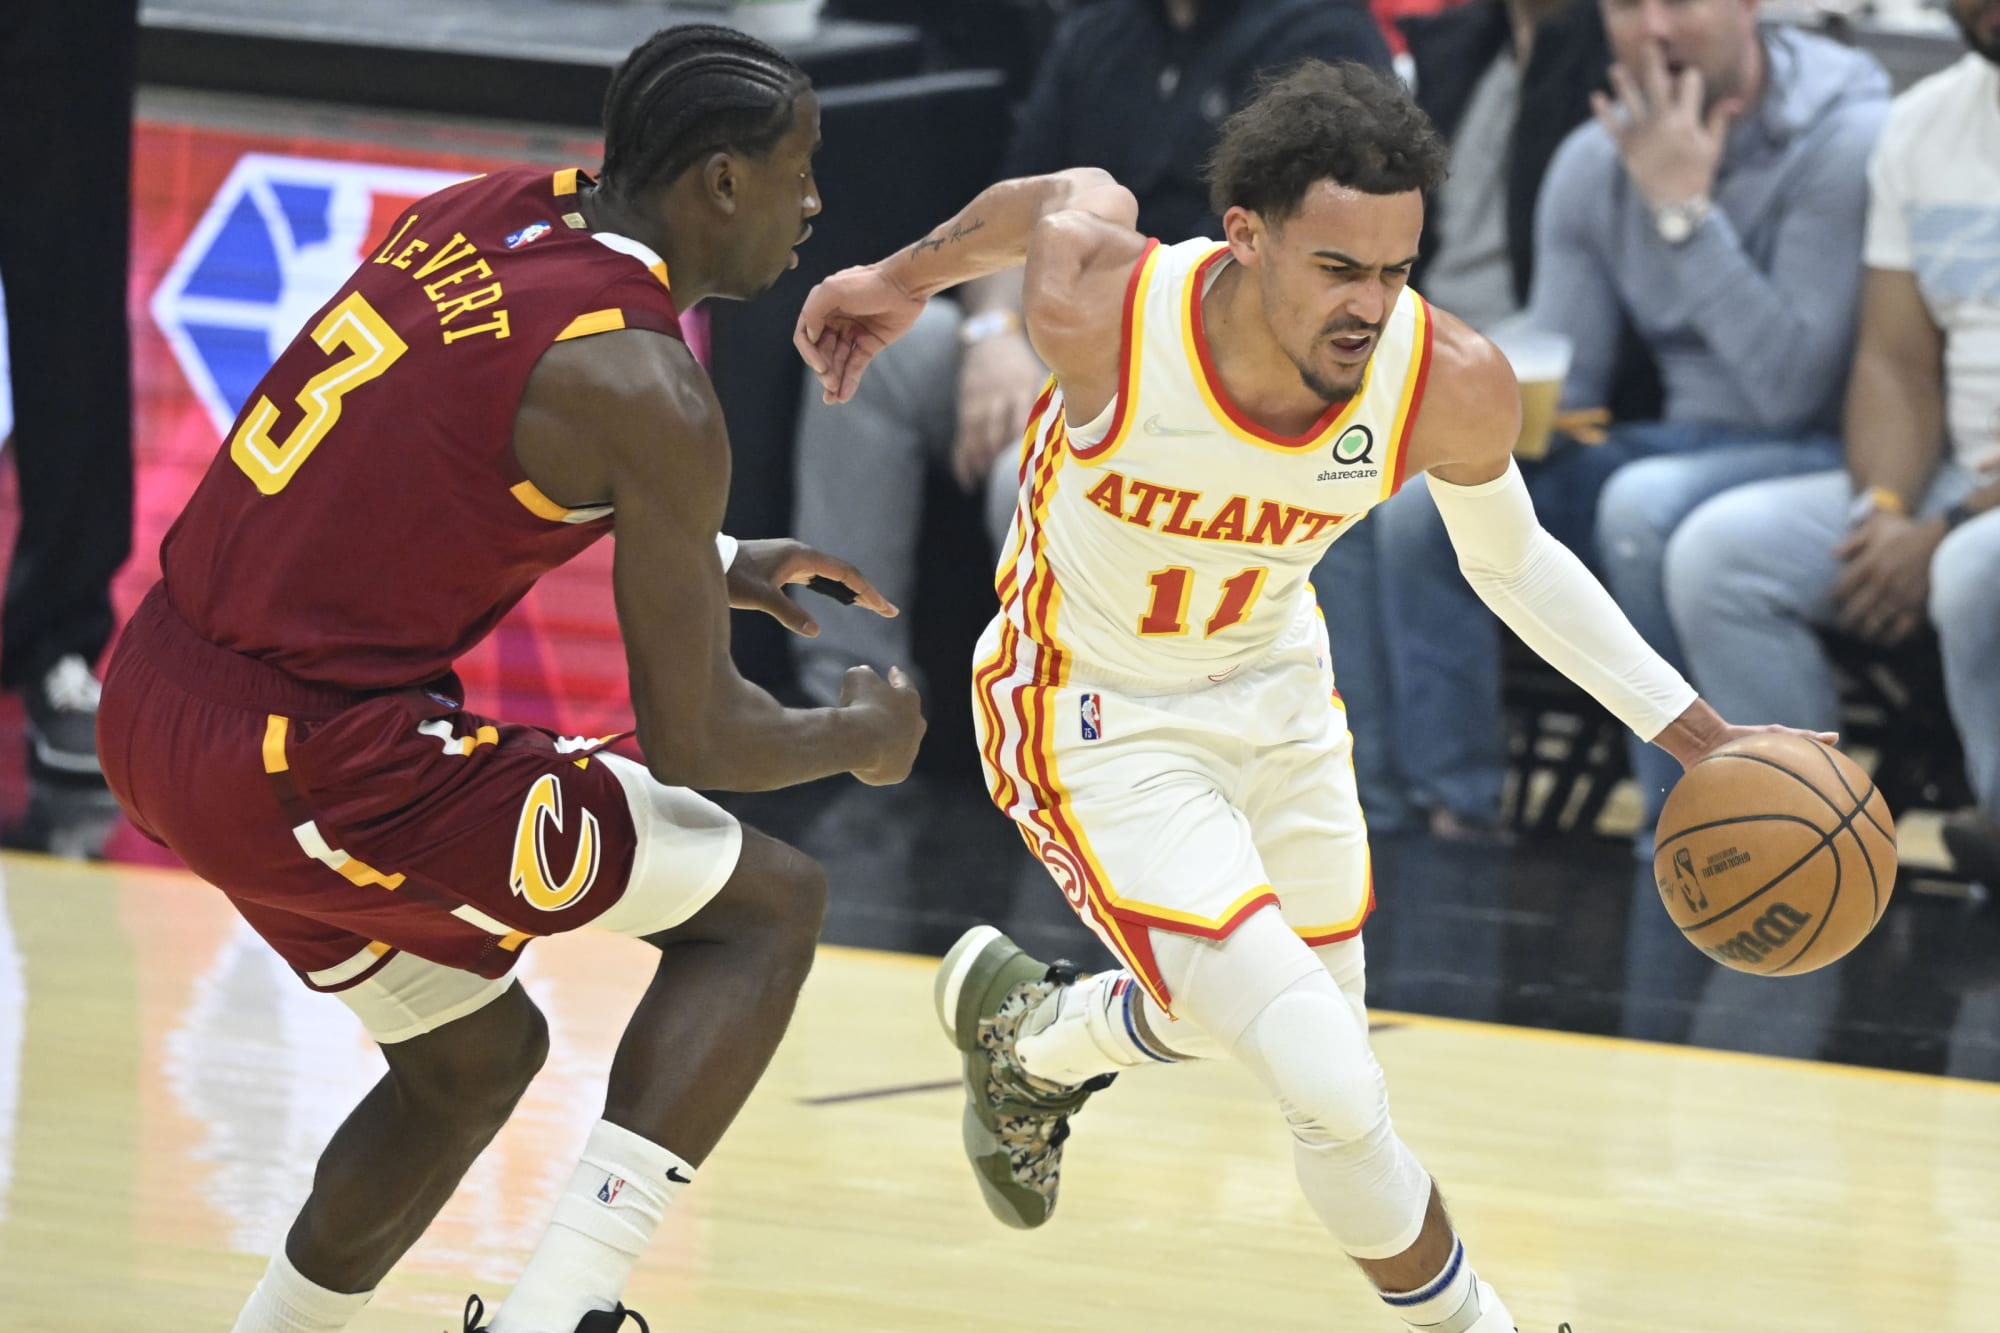 The Atlanta Hawks have added another game to their preseason